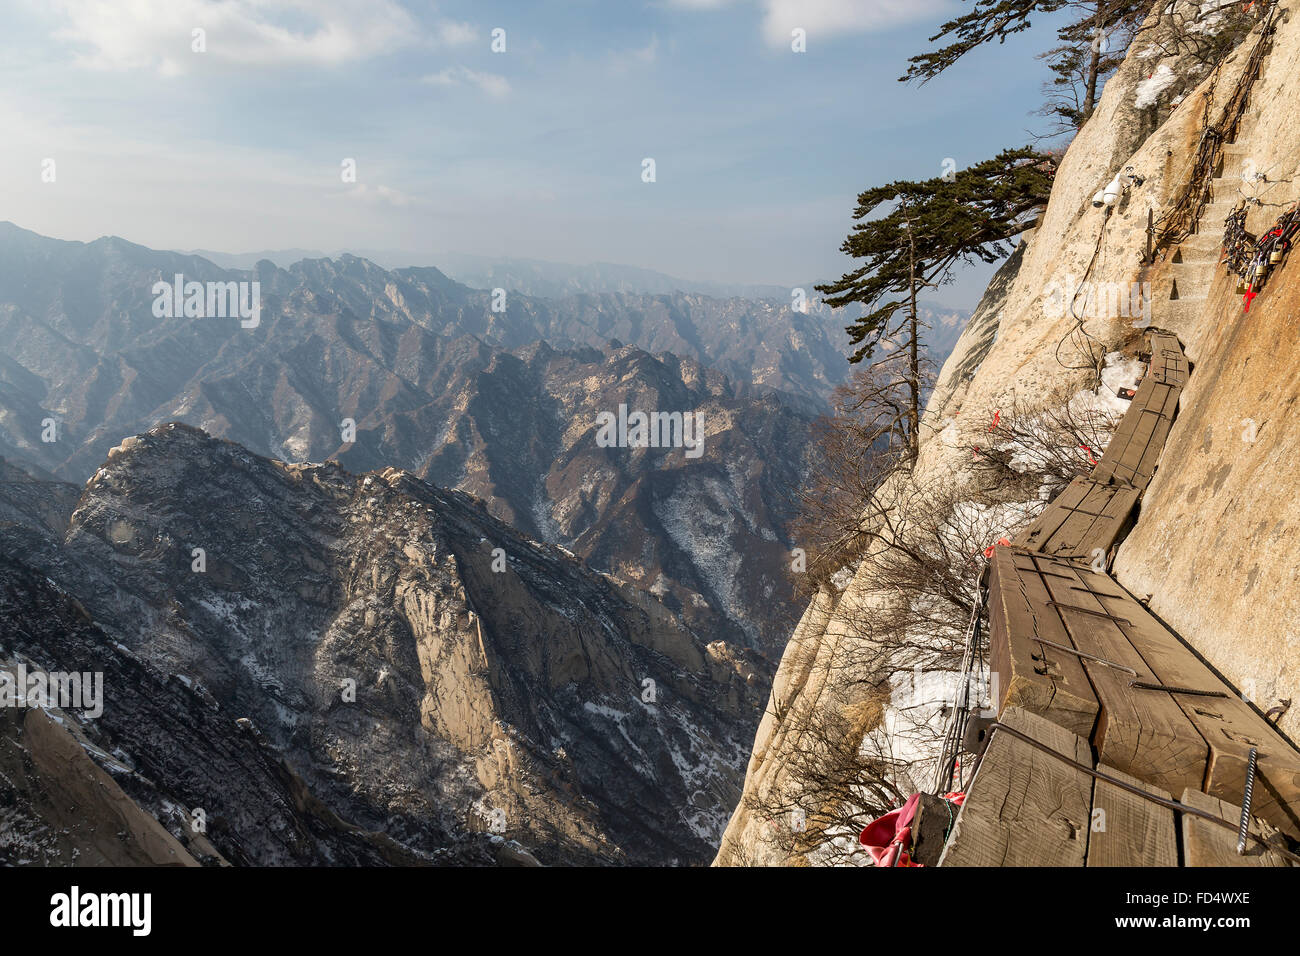 The Danger Trail of Mount Hua Shan Stock Photo